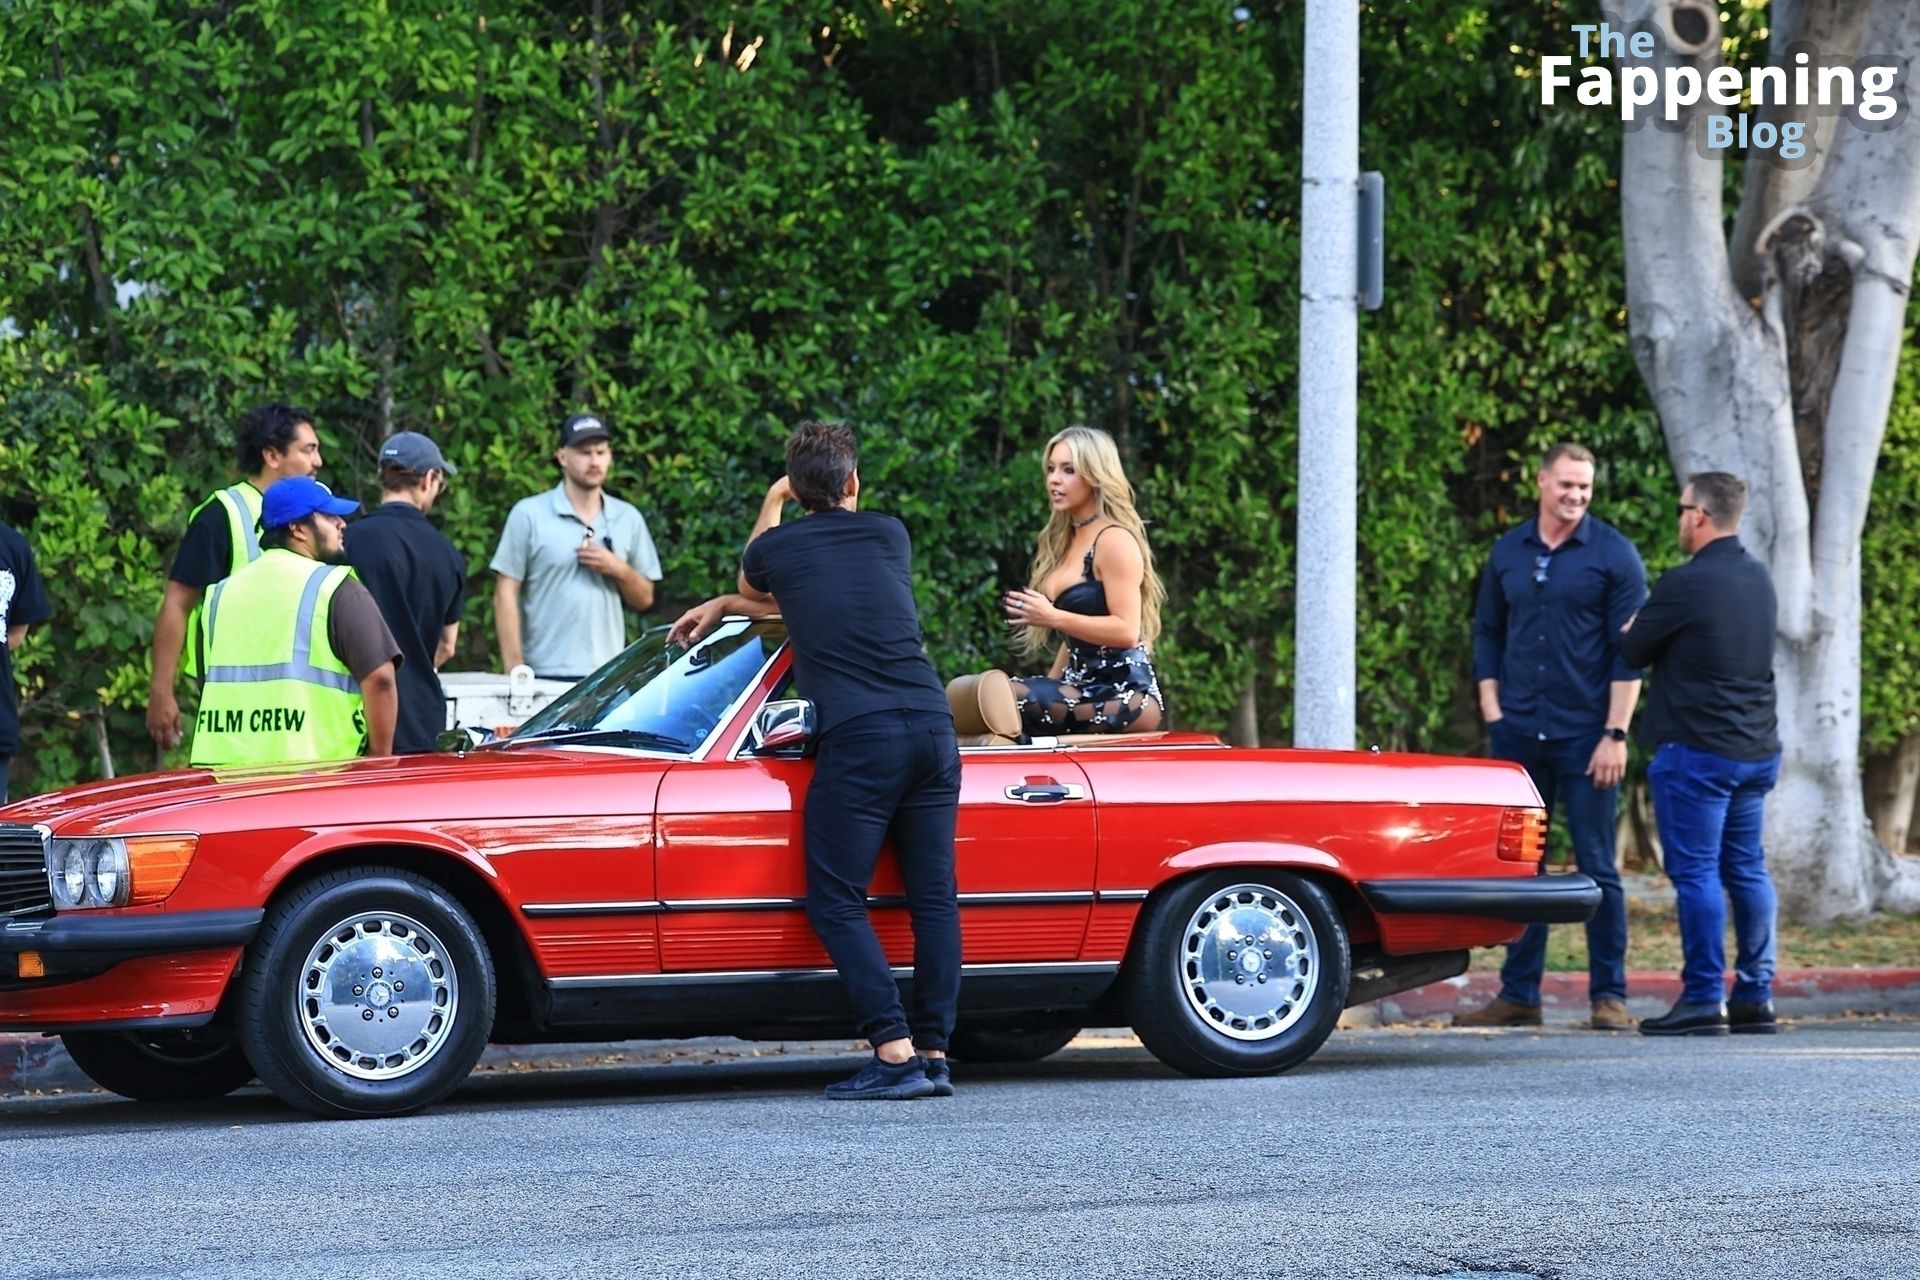 Sydney Sweeney Cruises Around in a Convertible During a LA Shoot (123 Photos)